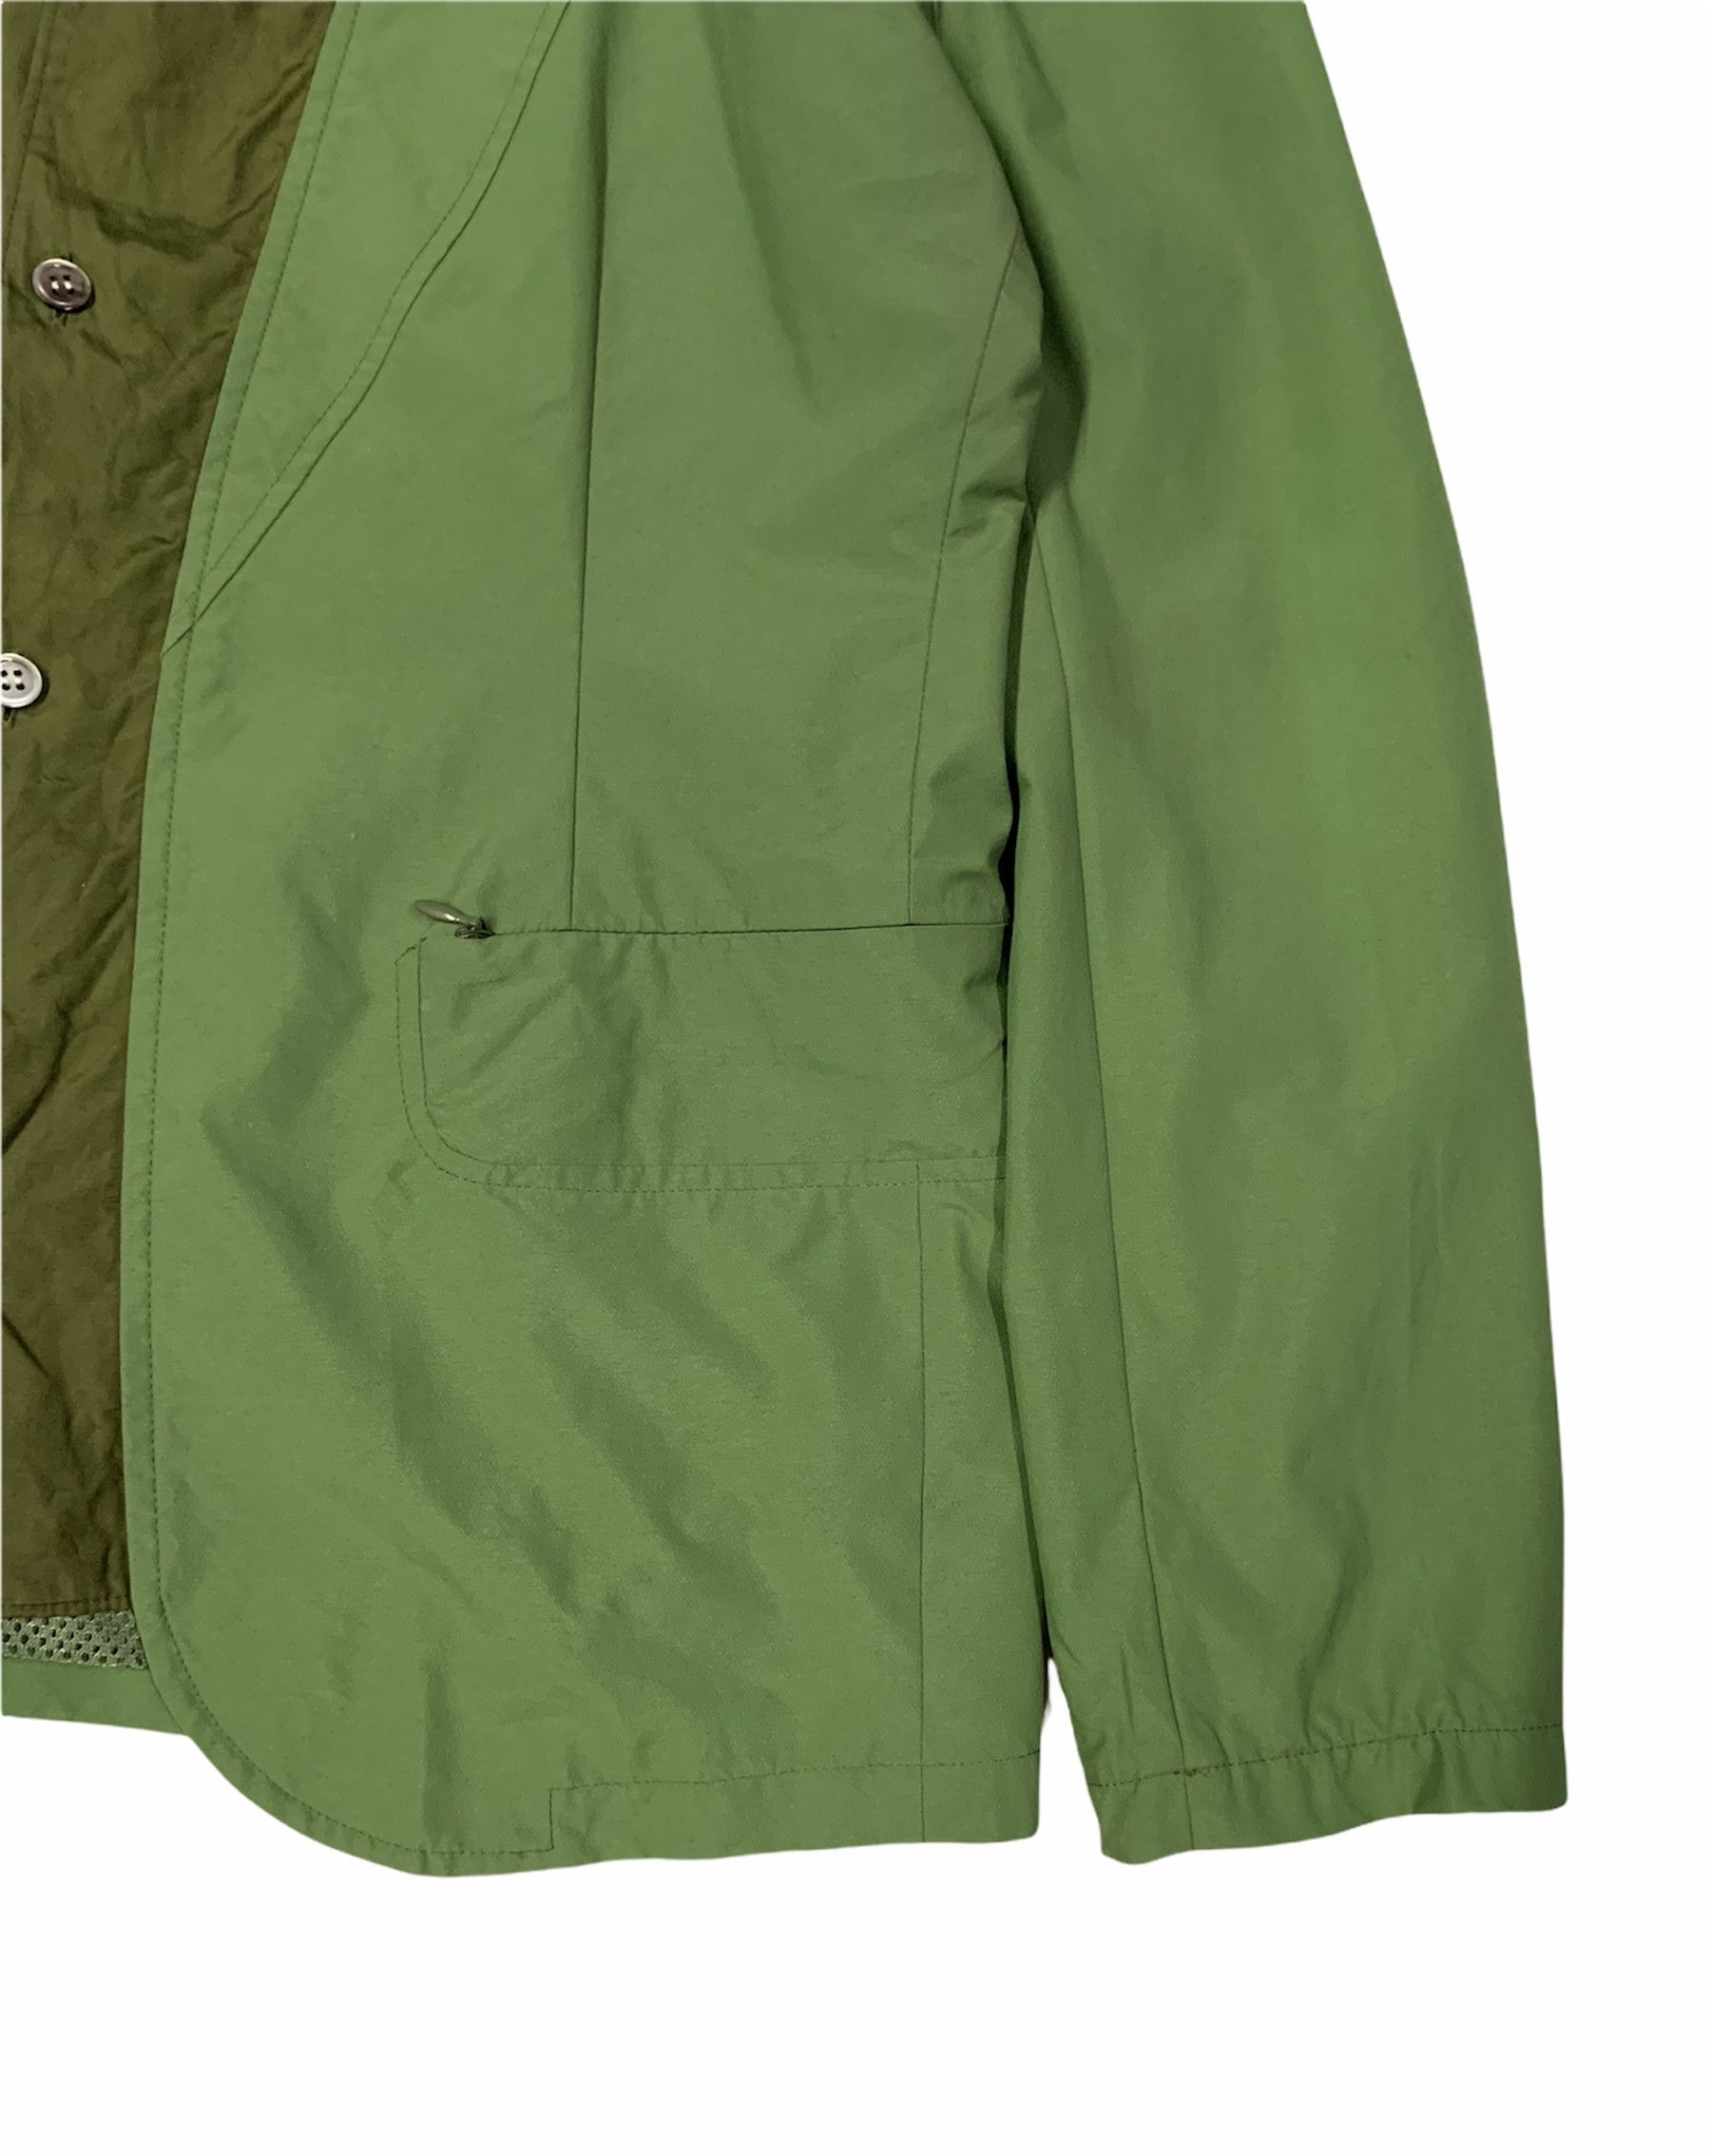 🔥UNDERCOVER CHOATIC DISCHORD JACKETS OLIVE GREEN - 3